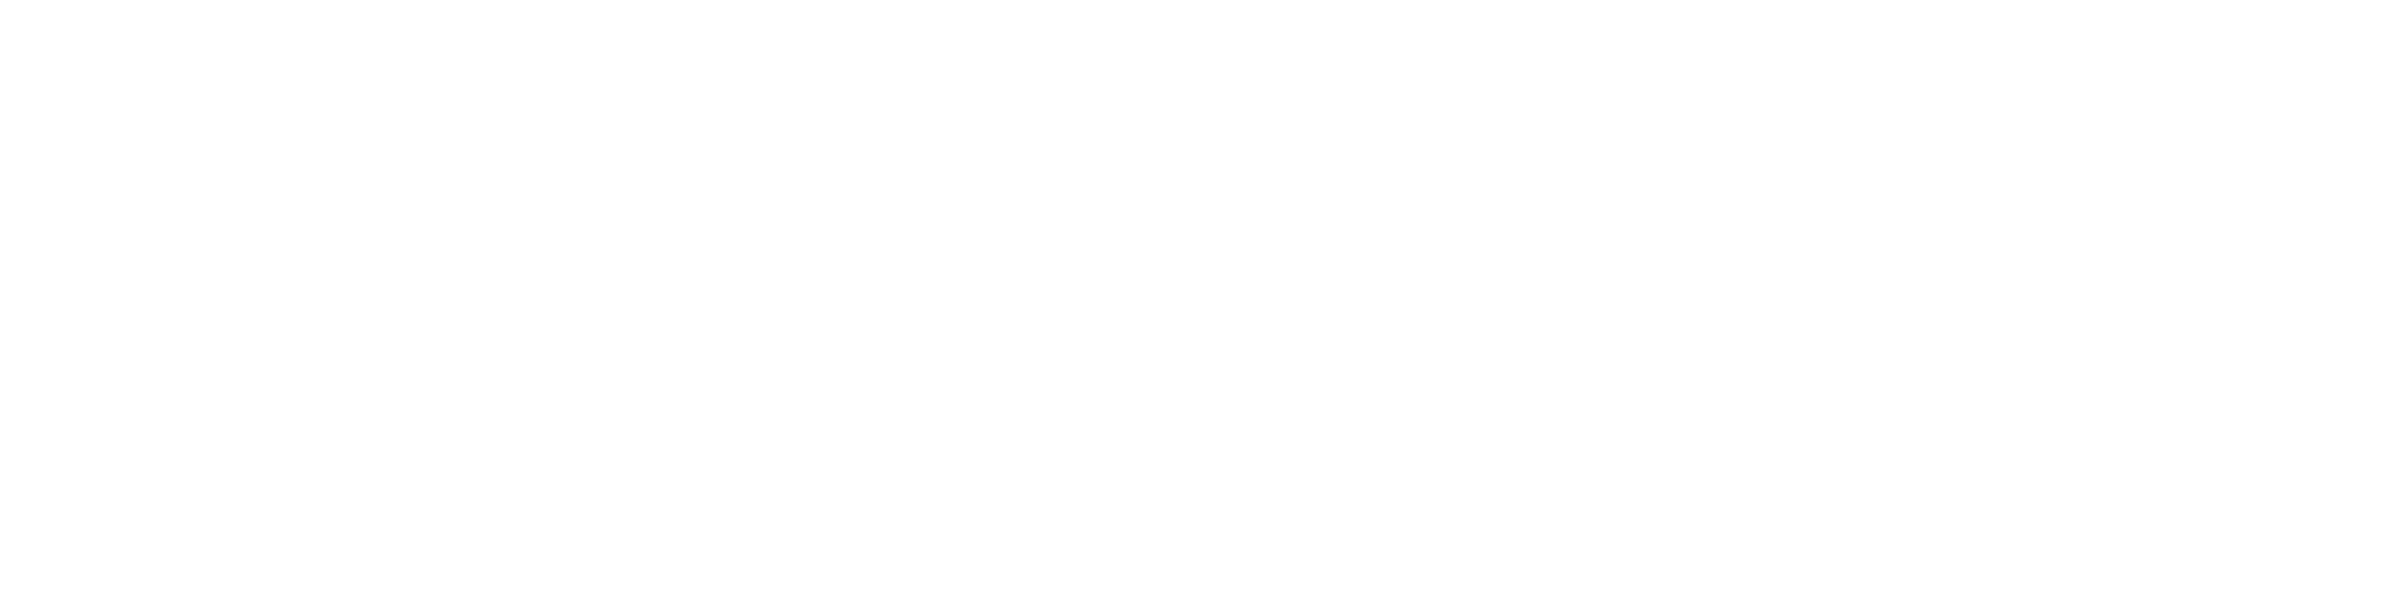 Phone Number and E-mail Address